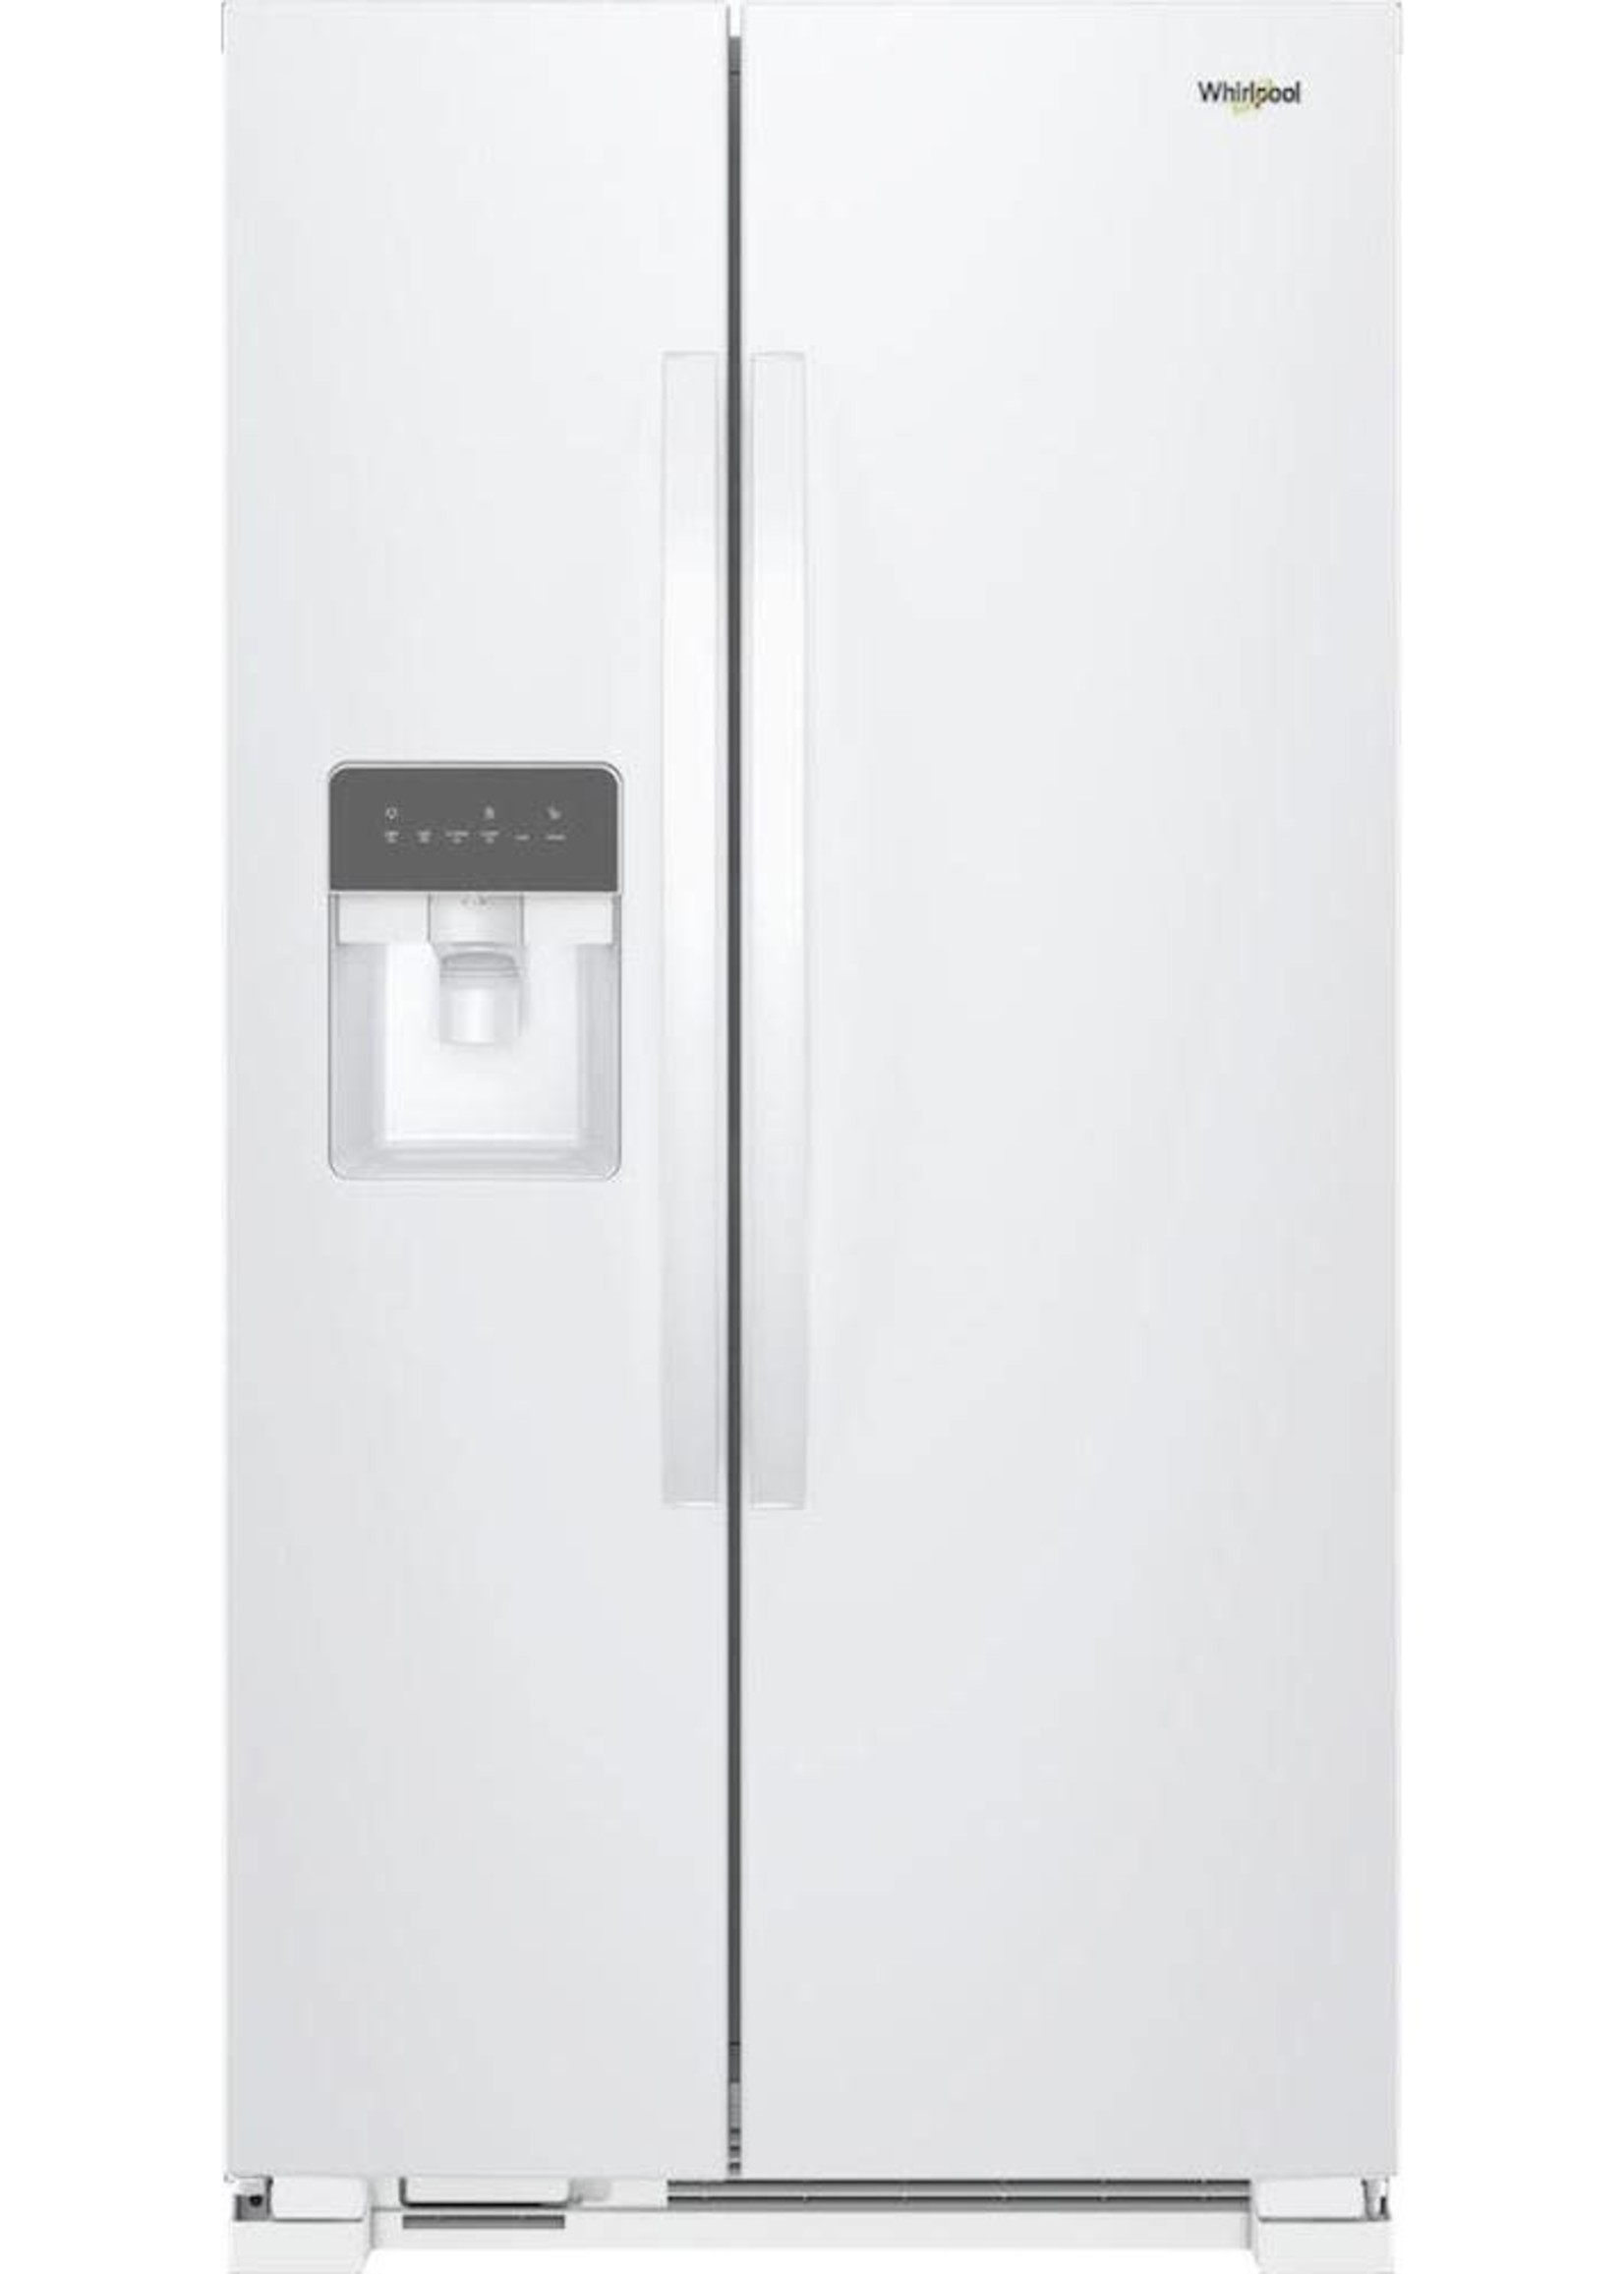 Whirlpool *Whirlpool WRS315SDHW 24.6-cu ft Side-By-Side Refrigerator with Ice and Water Dispenser - WHITE